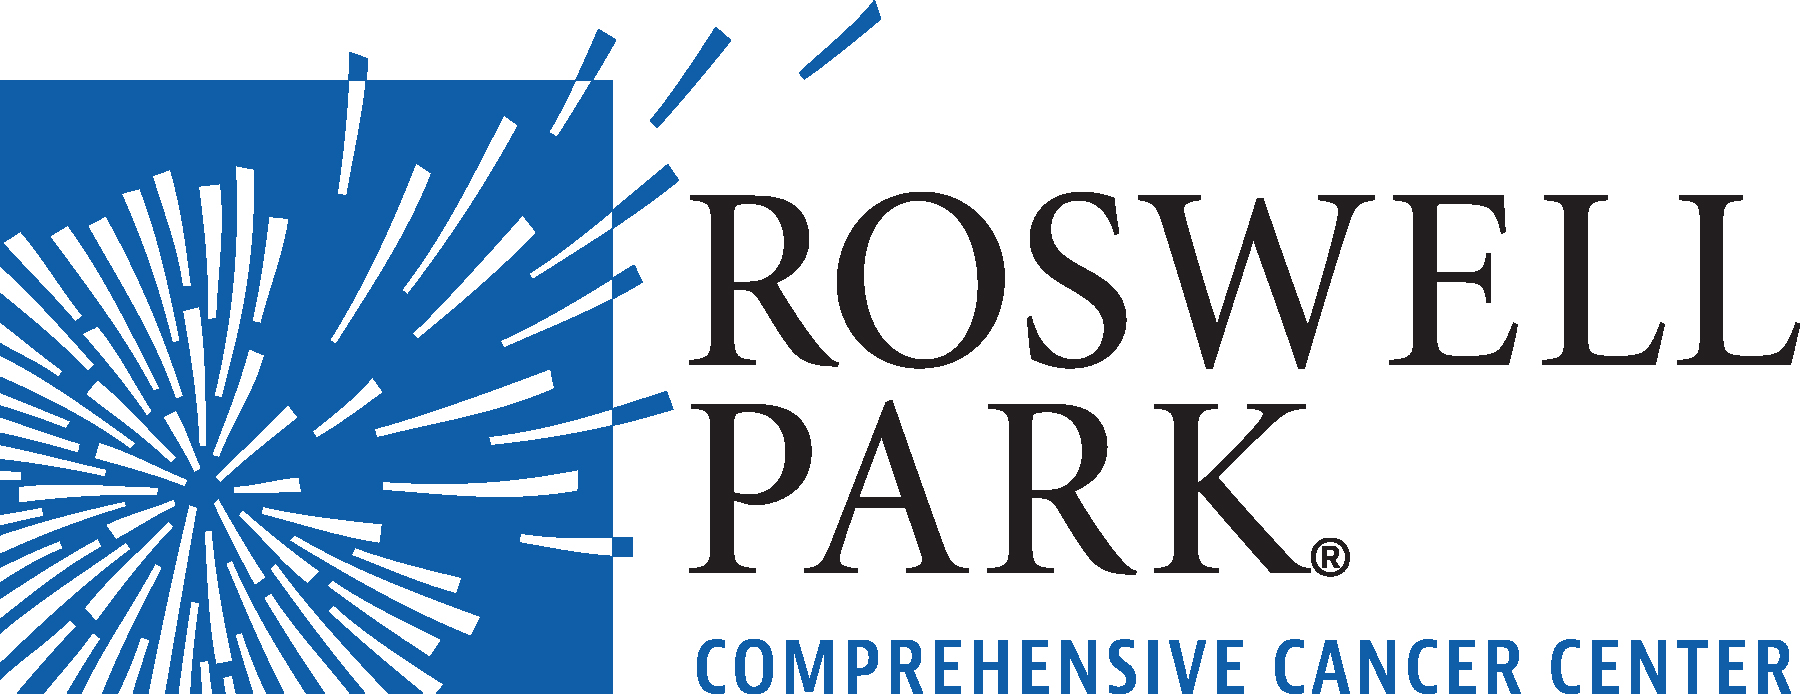 Roswell Park’s Kimberly Sweeney Named Vice President of Patient Care Experience